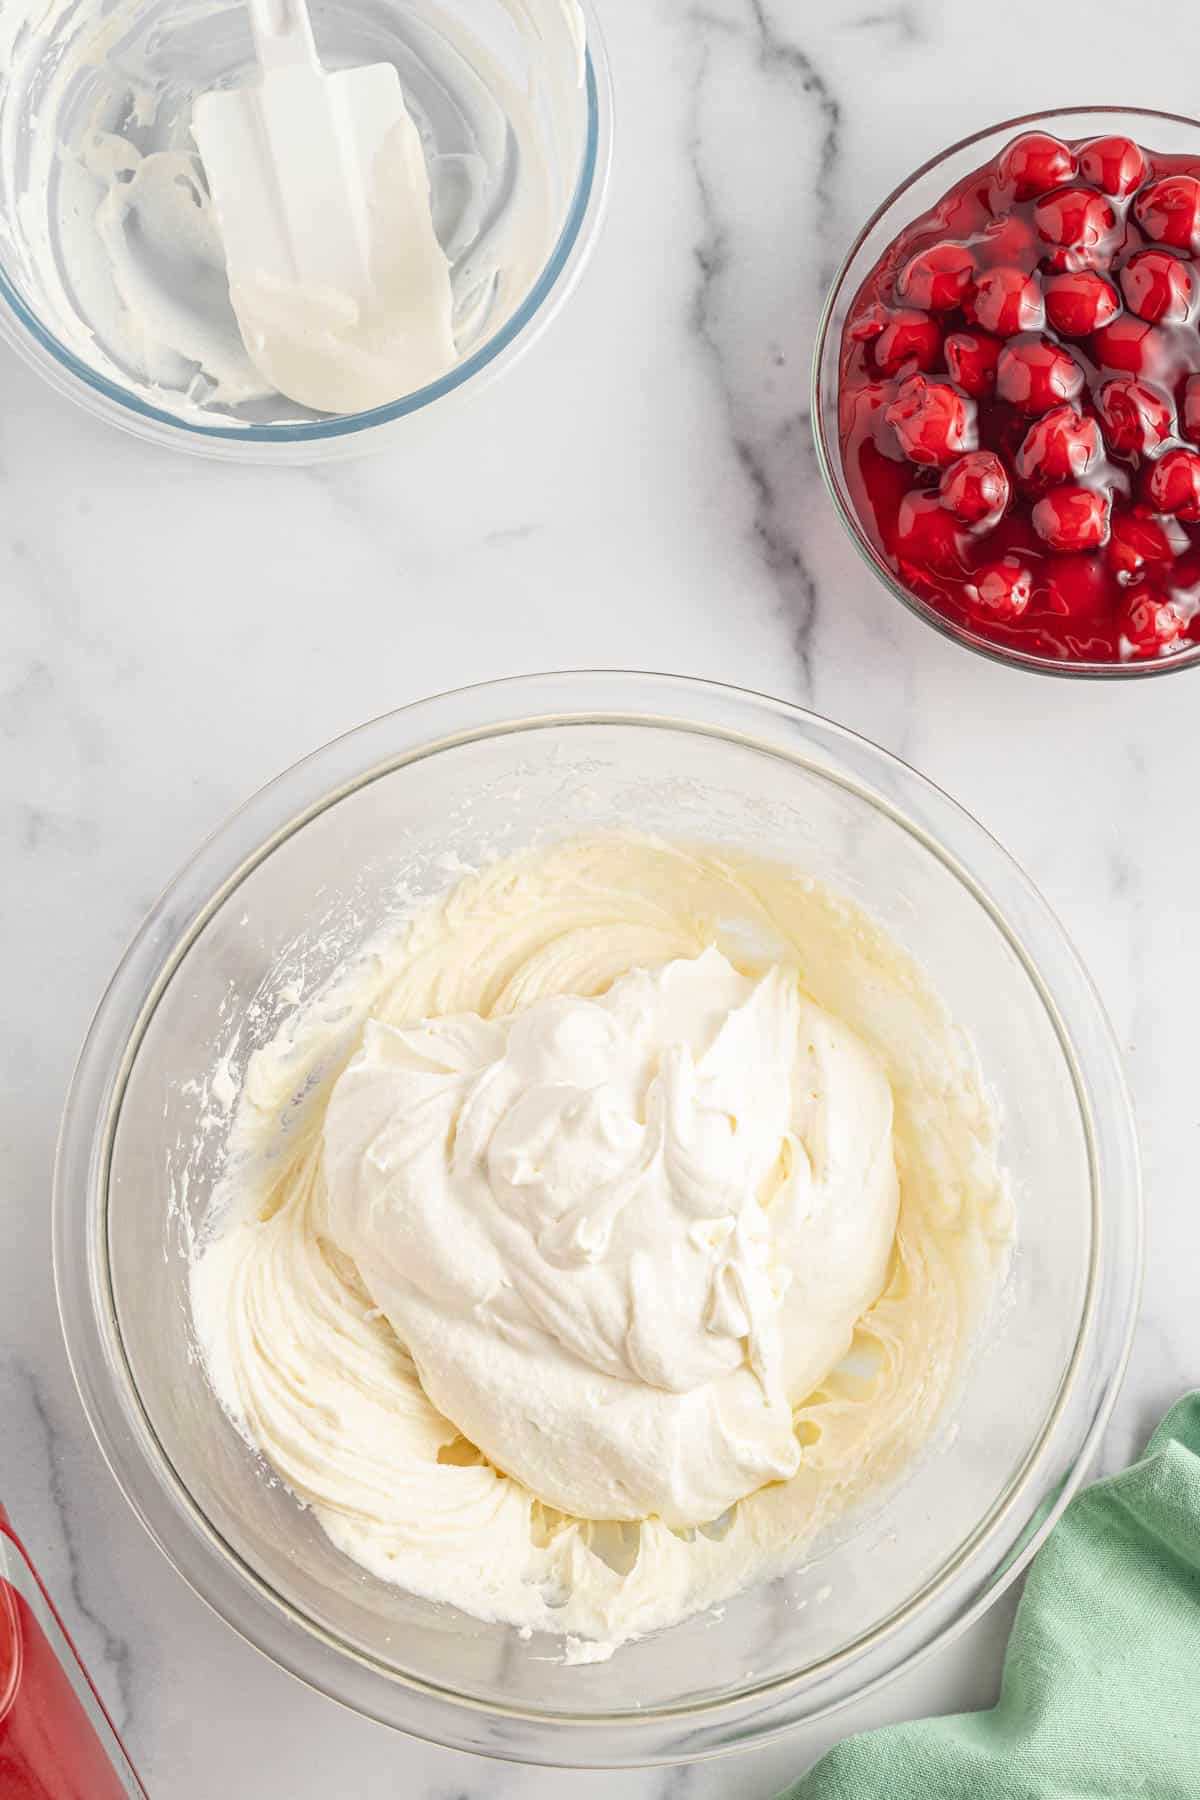 Cool Whip added to mixing bowl with cream cheese mixture